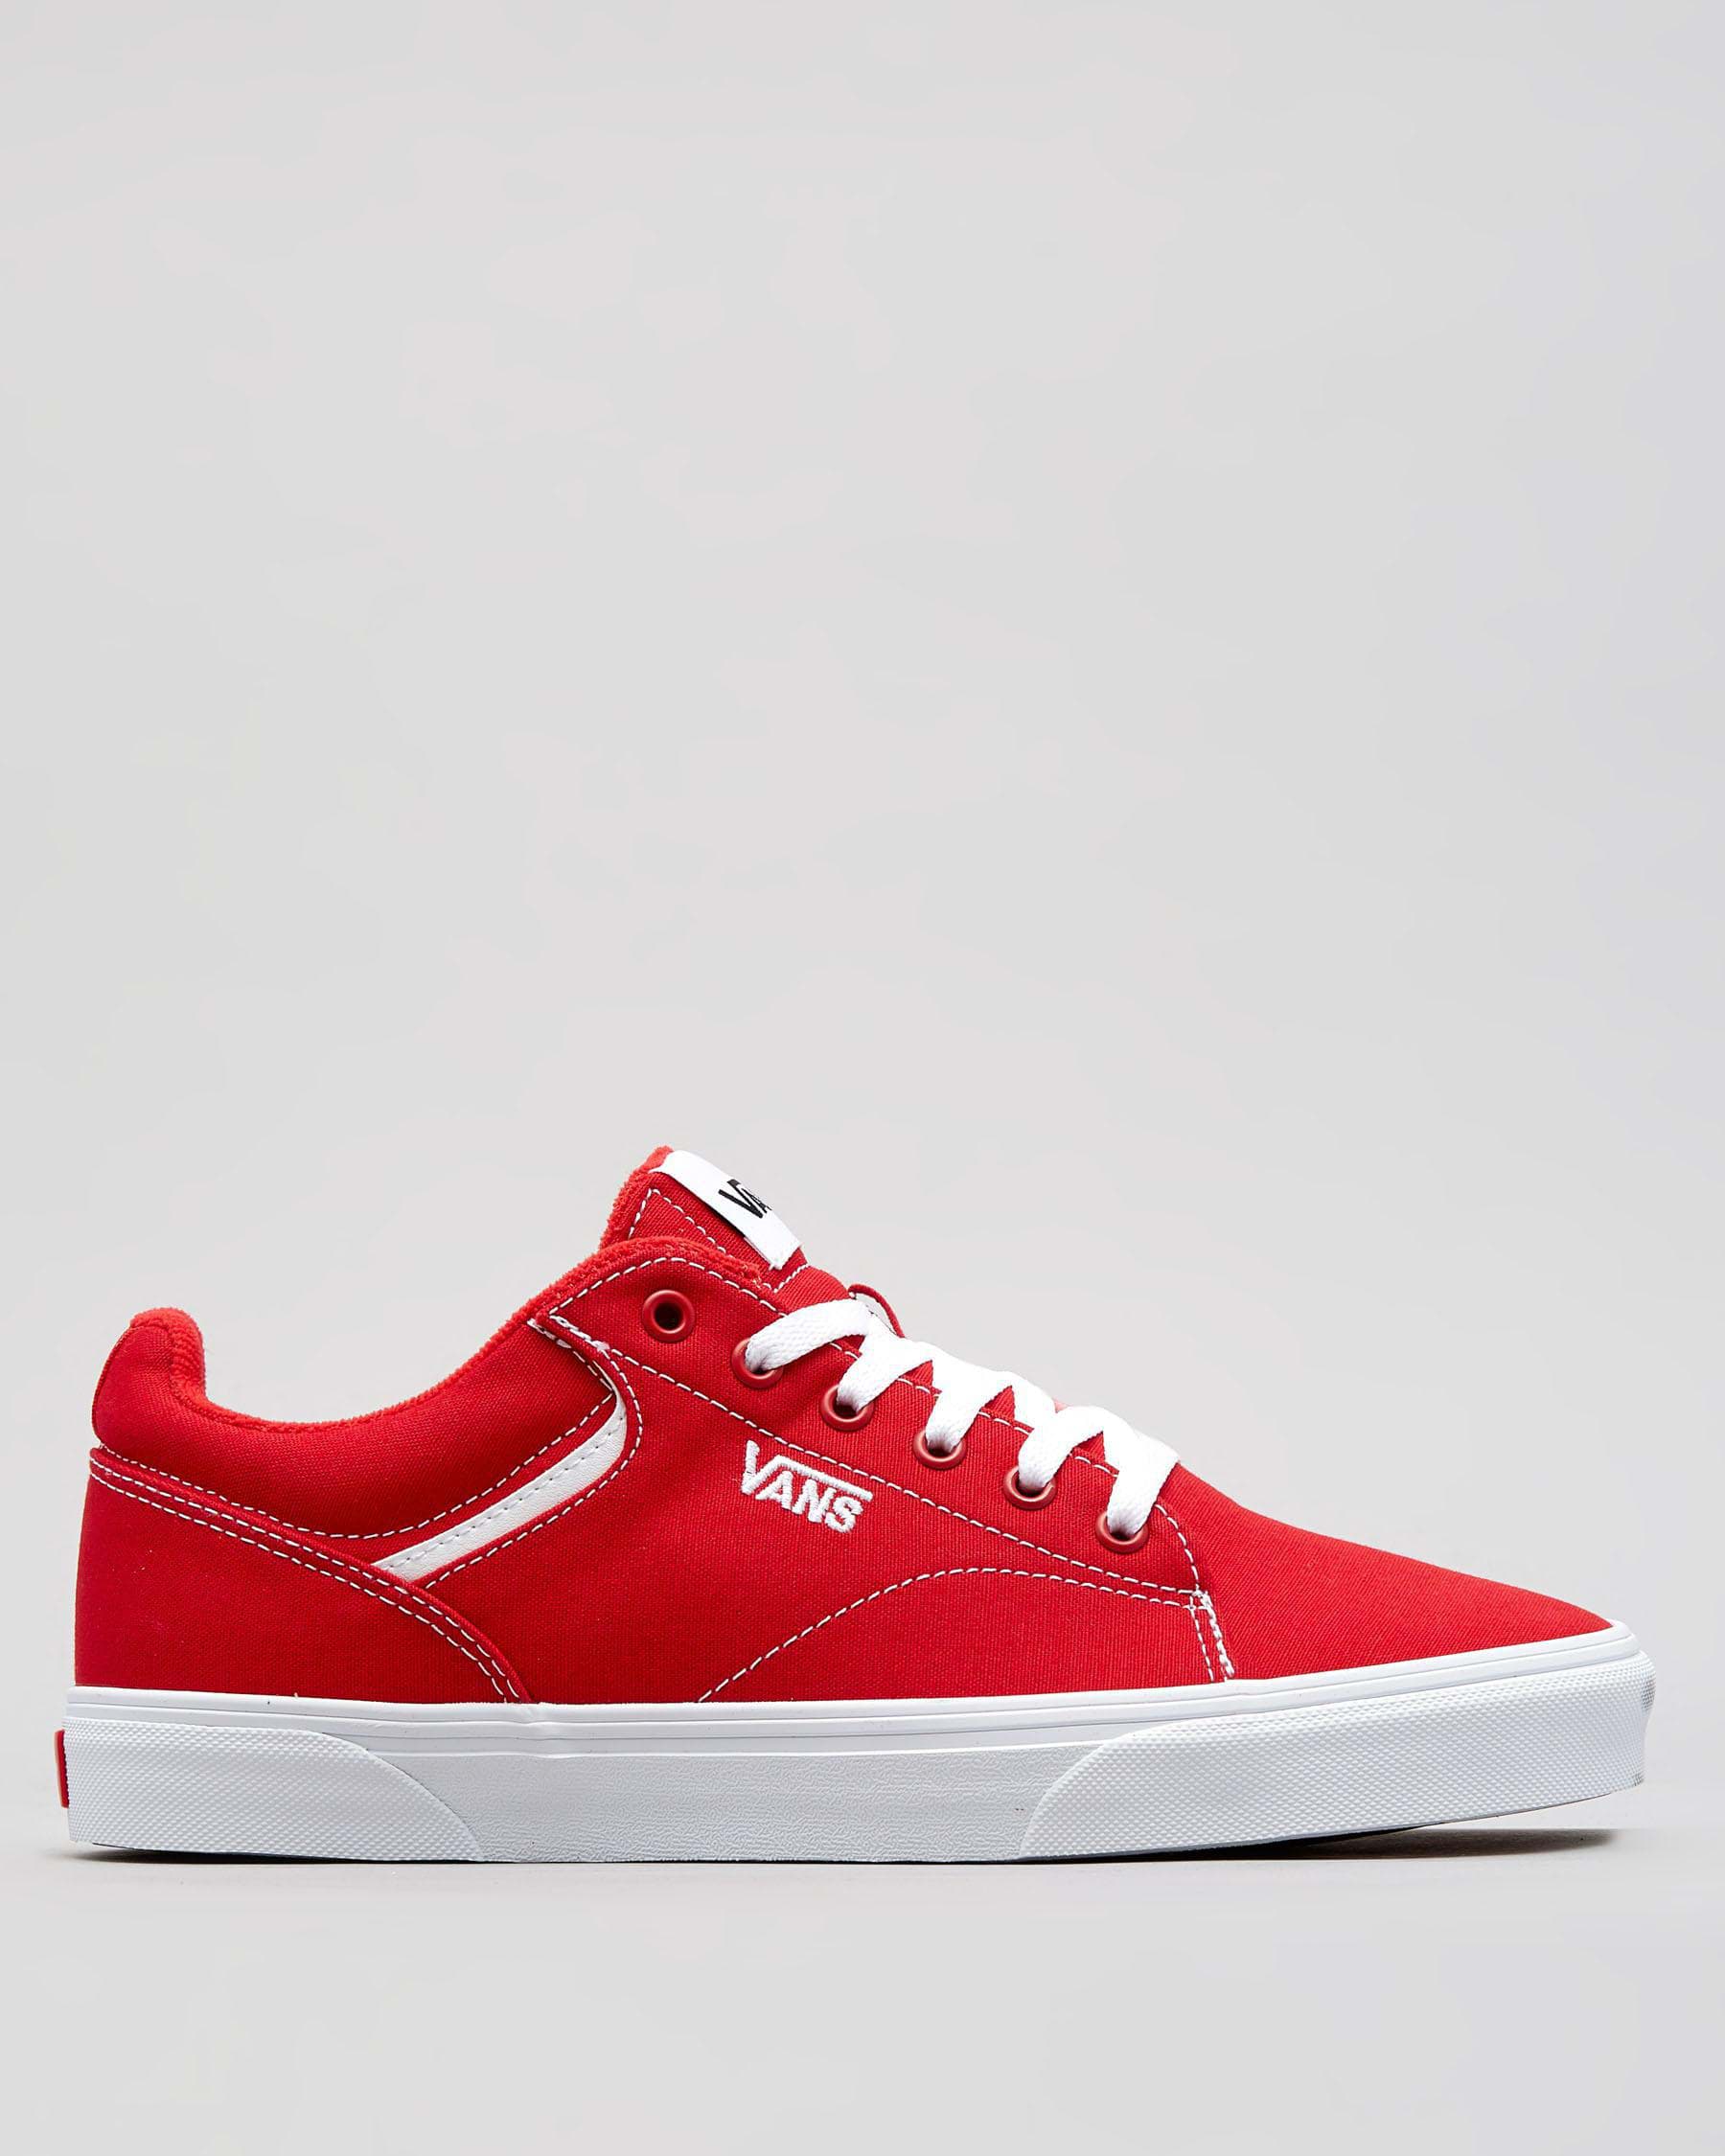 Shop Vans Seldan Shoes In Red/white - Fast Shipping & Easy Returns ...